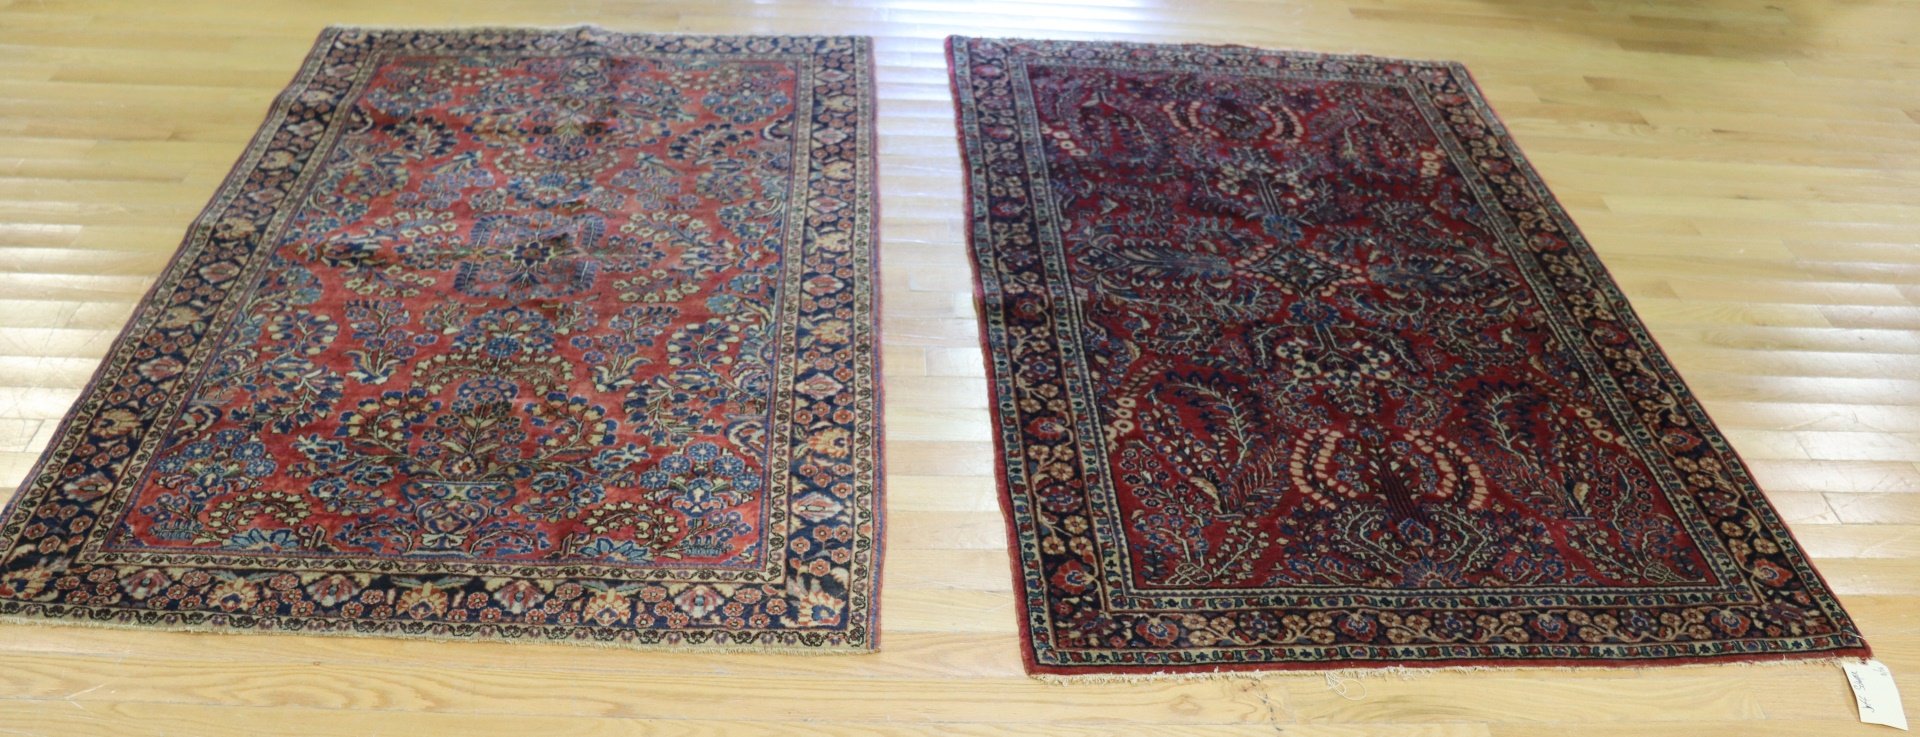 2 ANTIQUE & FINELY HAND WOVEN SAROUK